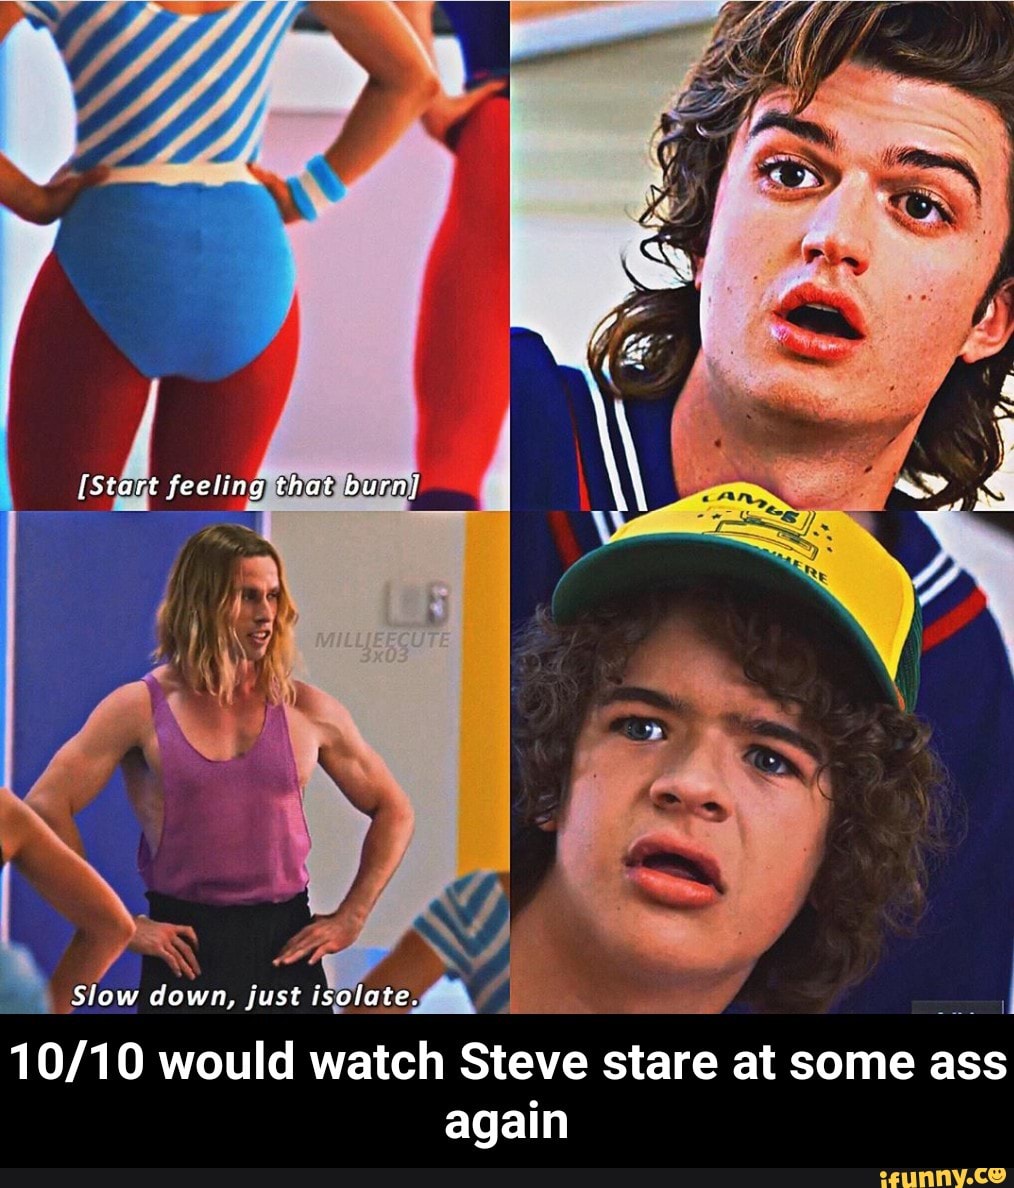 10/10 would watch Steve stare at some ass again - iFunny